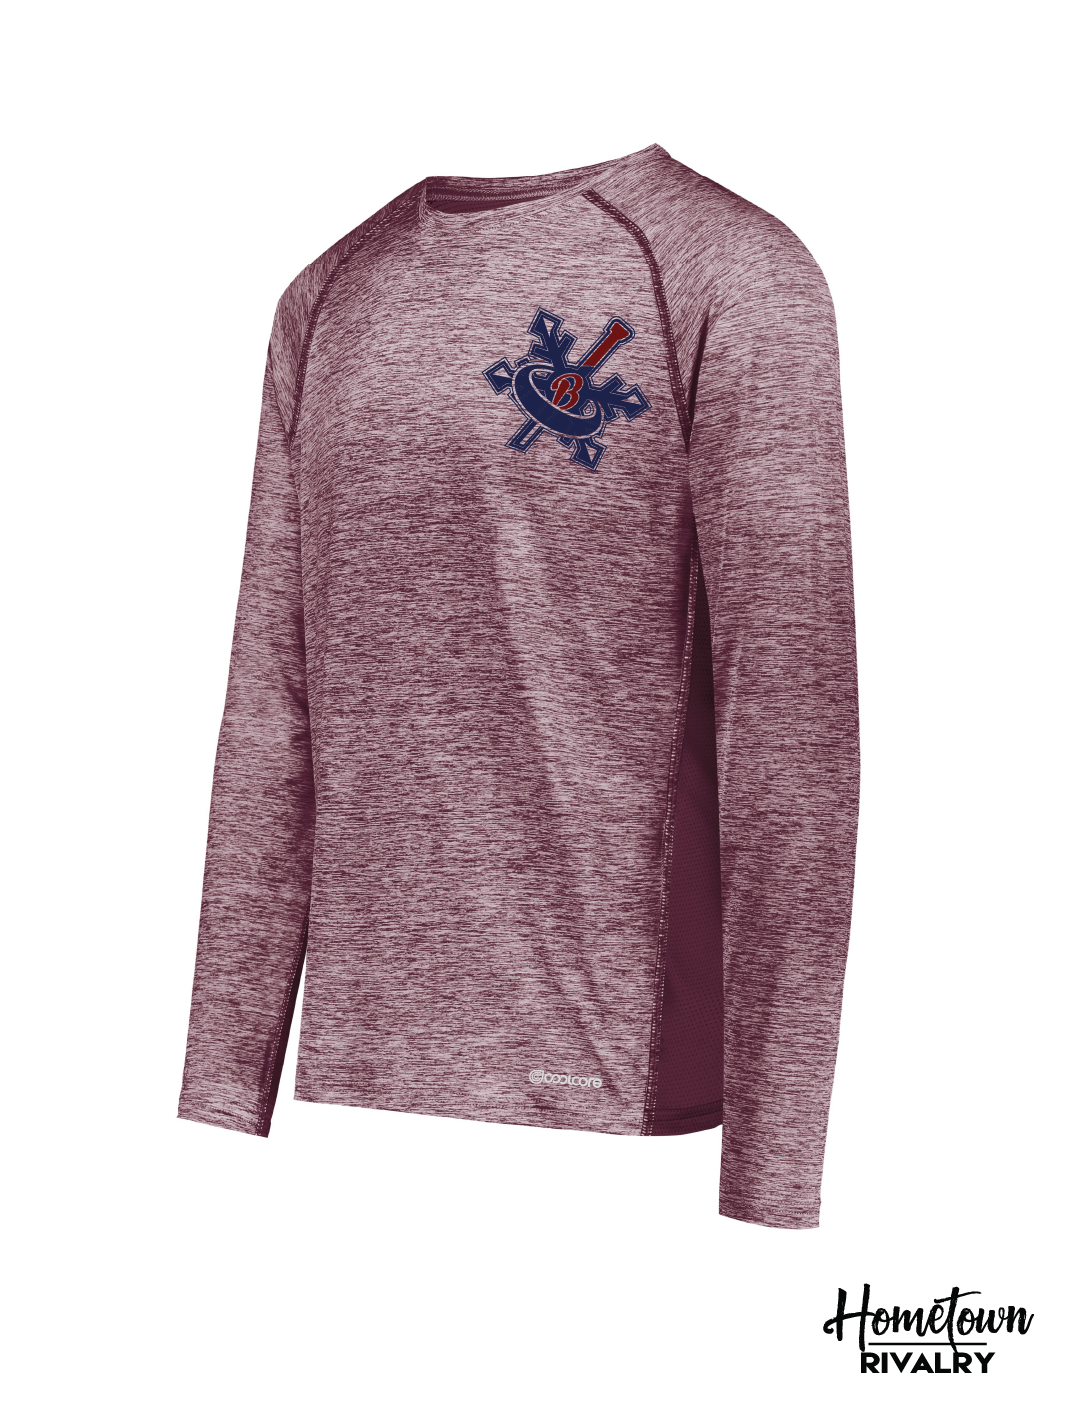 Barrie Blizzard Ringette Long Sleeve Training Tee-Youth